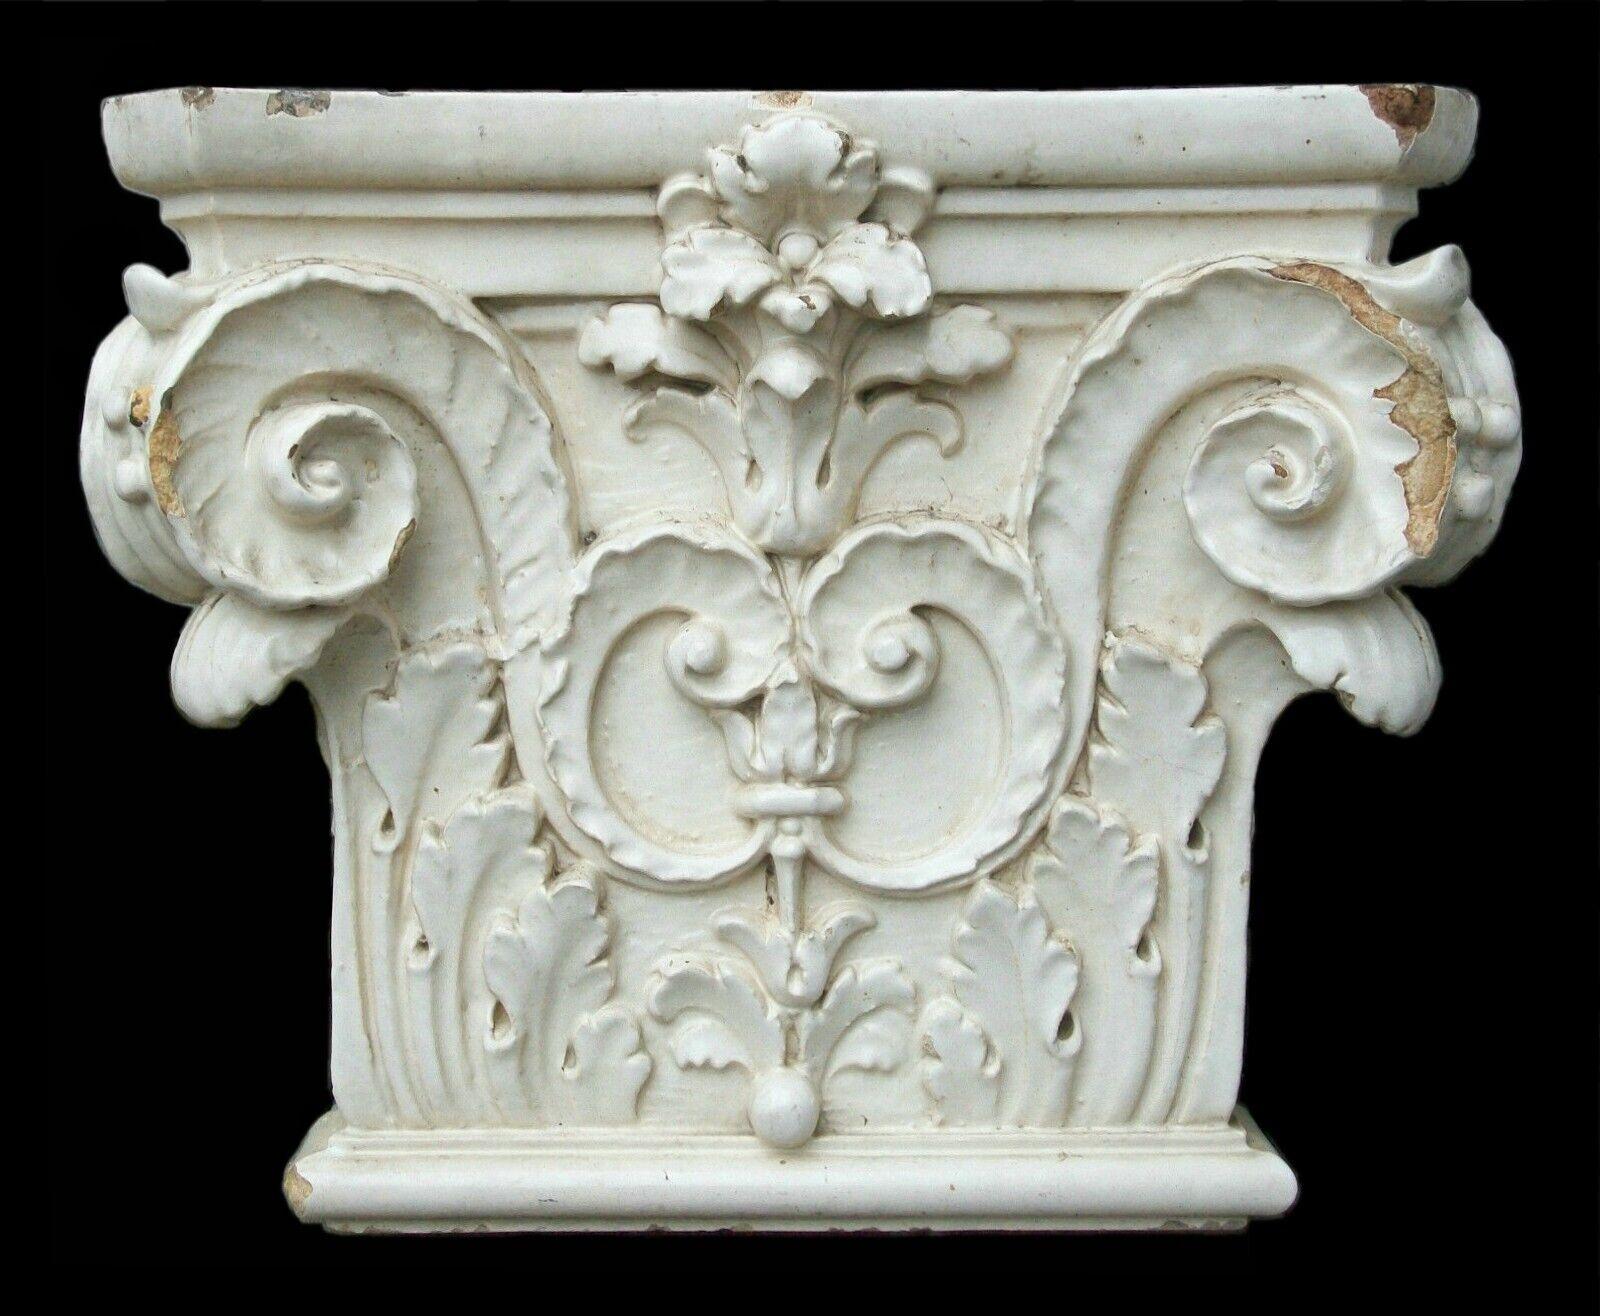 Antique Architectural Corinthian Capital - glazed cast ceramic composition - Canada or United States - late 19th century.

Good antique condition - chips/loss to the body & glaze - grime that comes with age - concrete residue & inset bricks to the